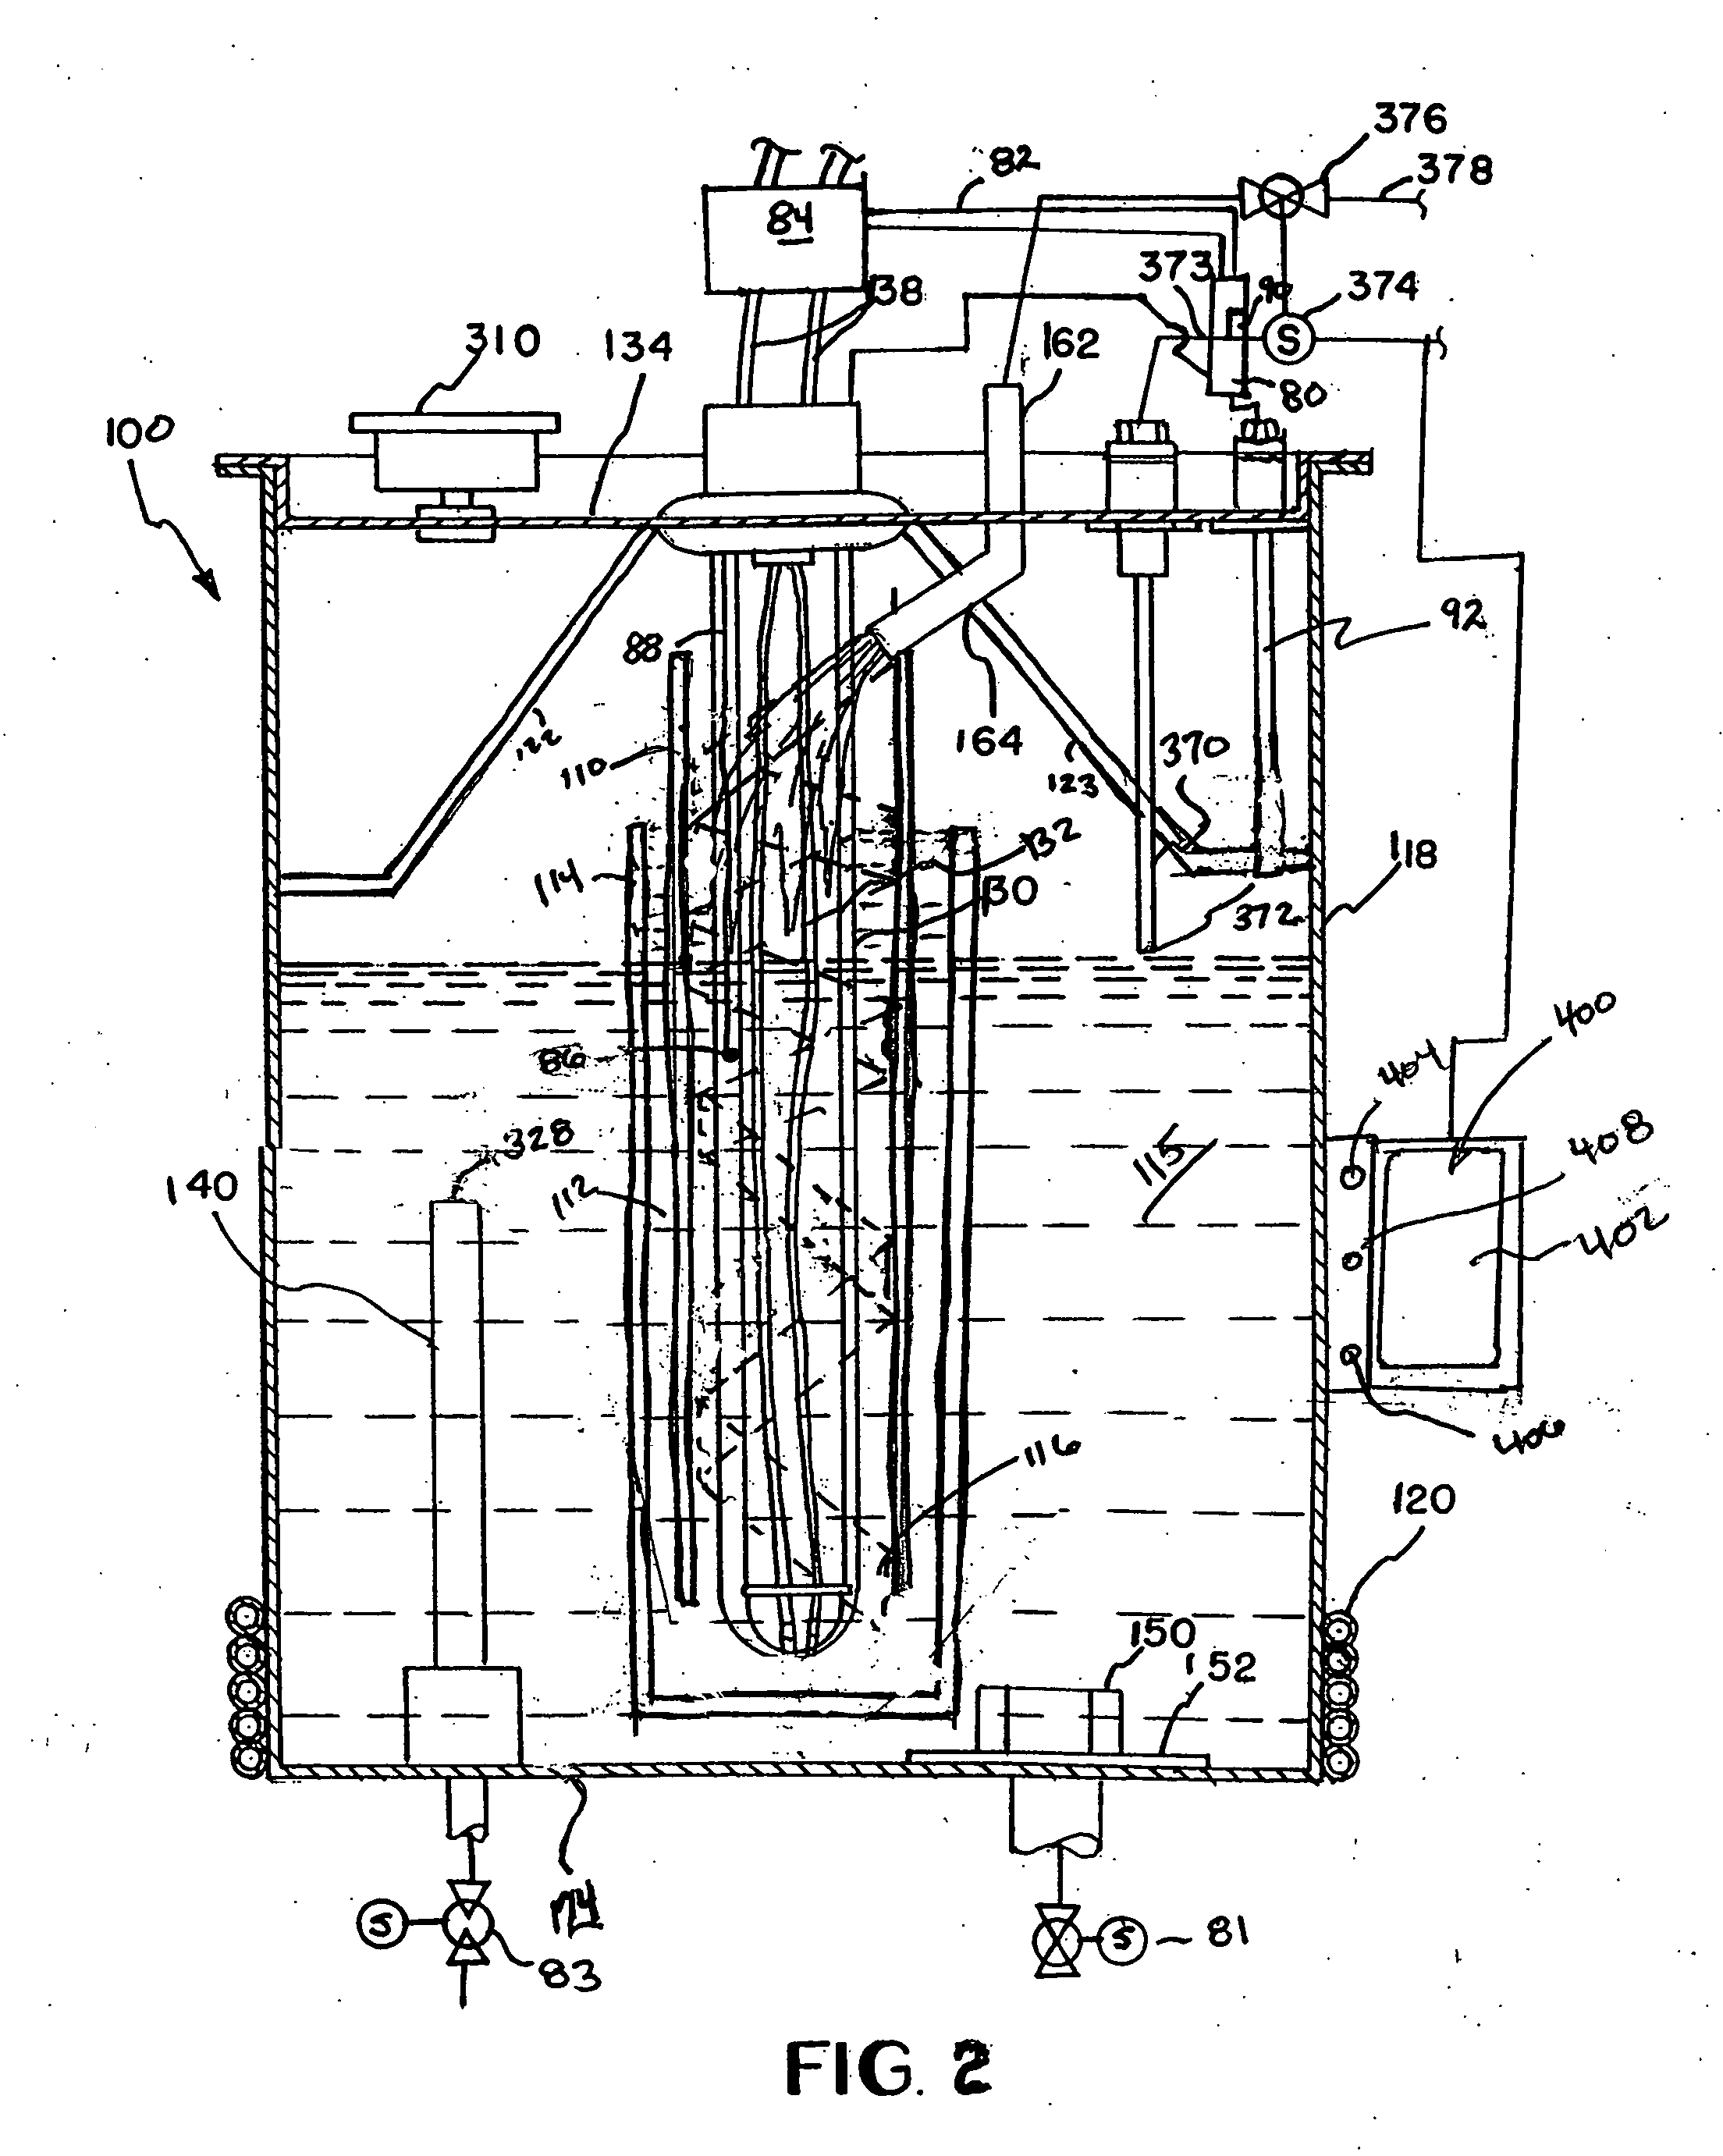 Treated water dispensing system